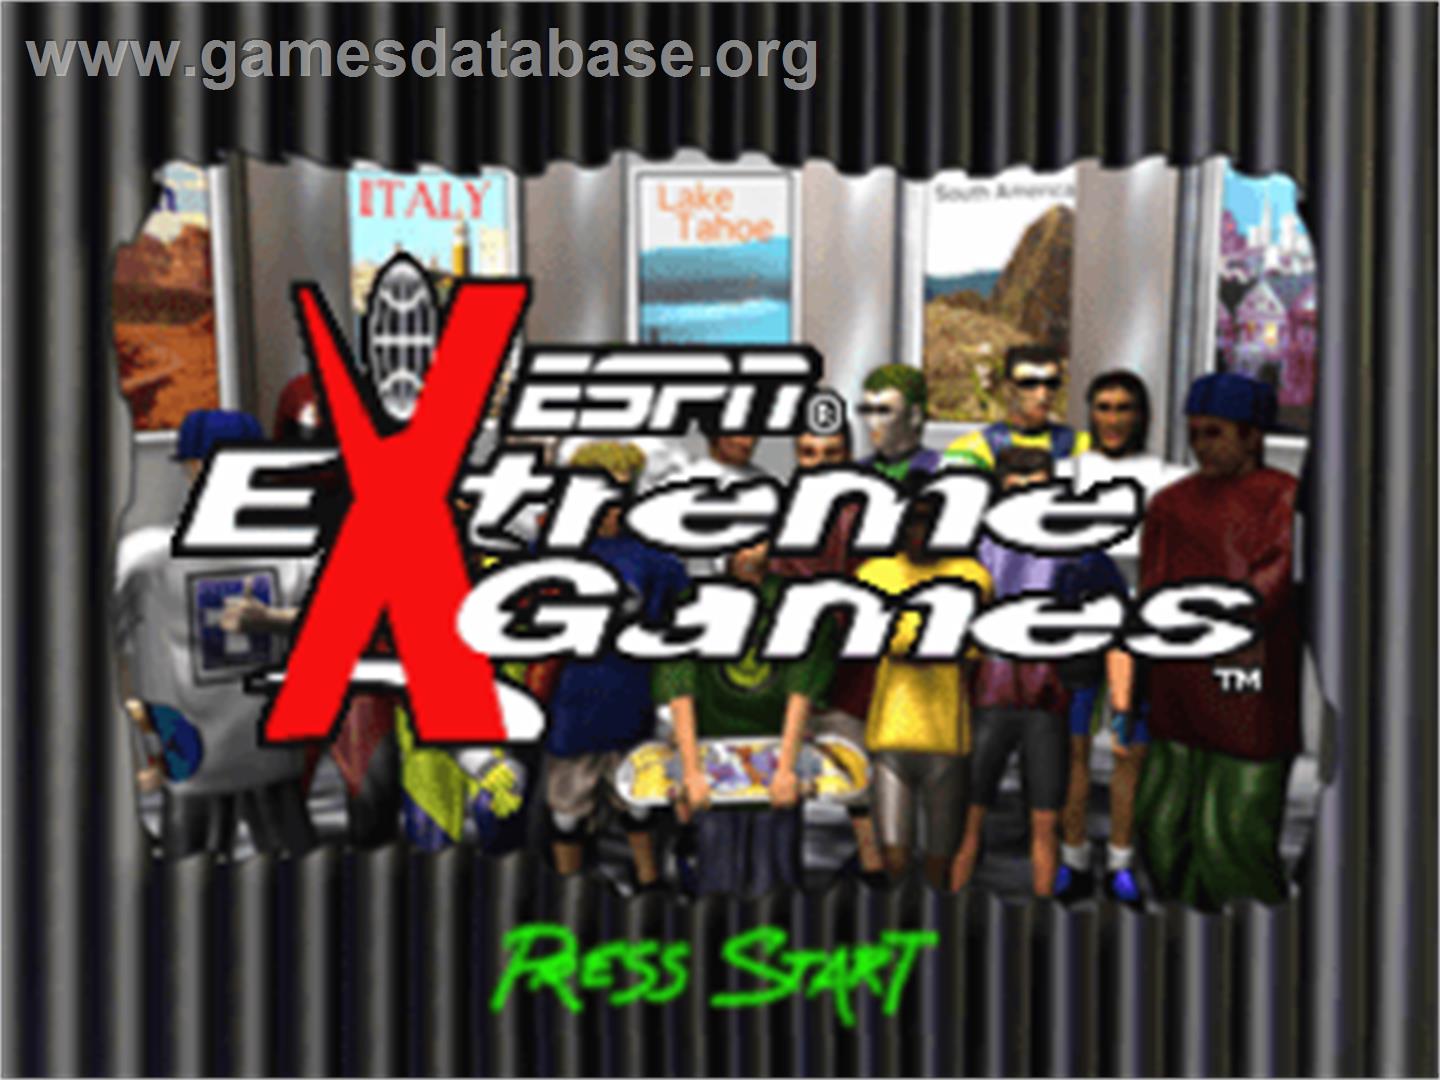 ESPN Extreme Games - Sony Playstation - Artwork - Title Screen